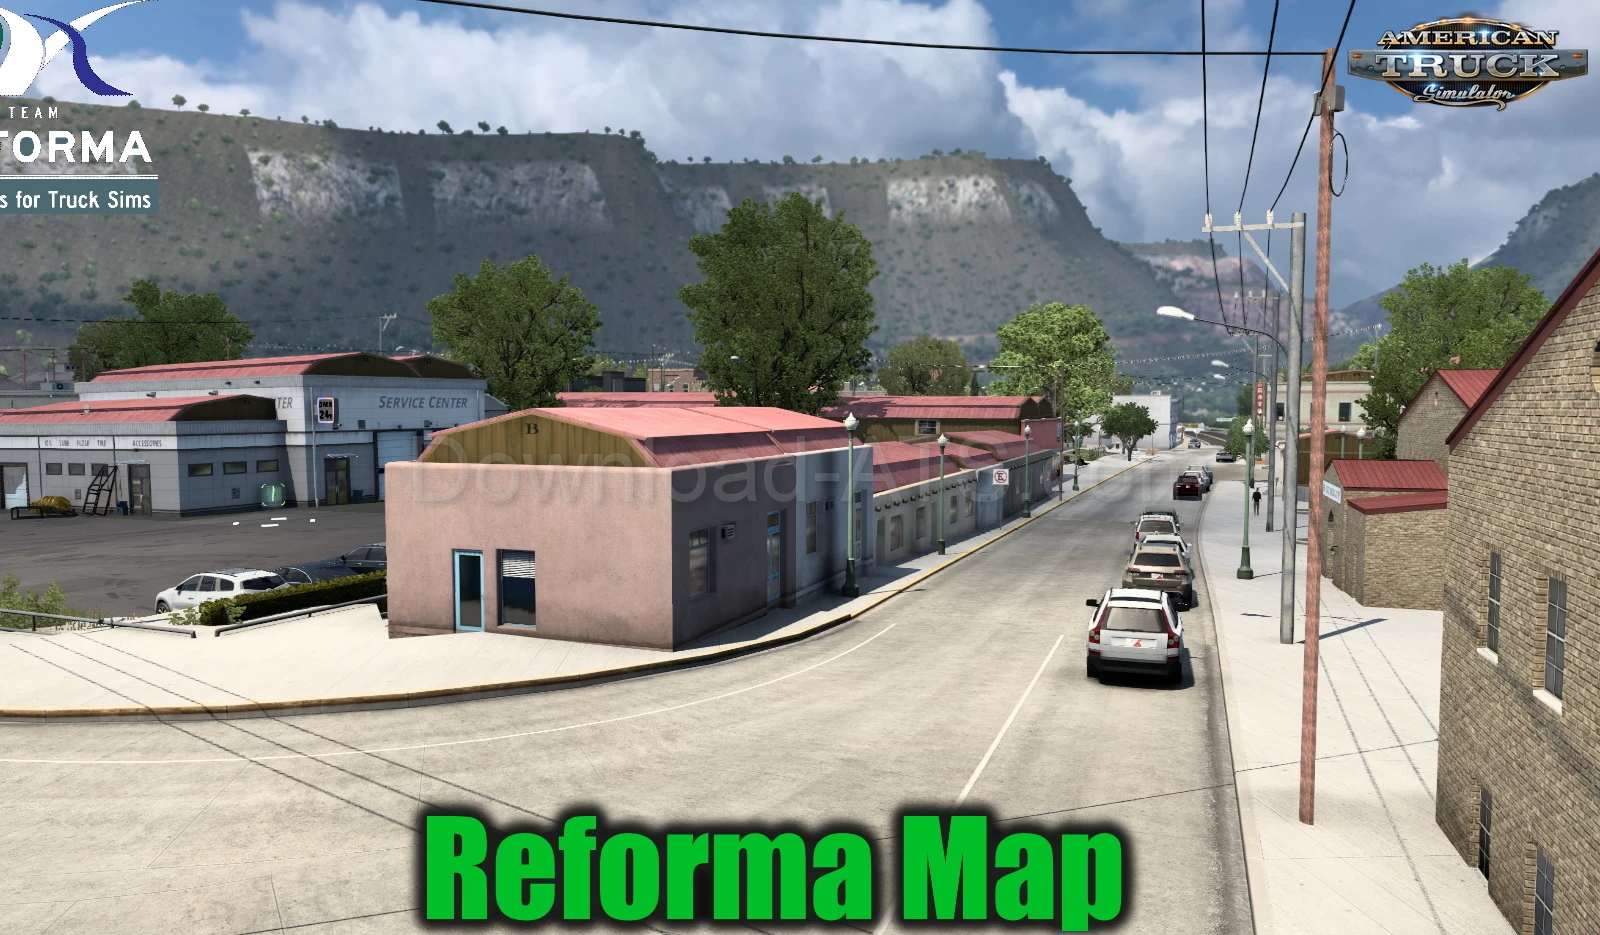 Reforma Map v2.5.8 (1.48.x) for ATS